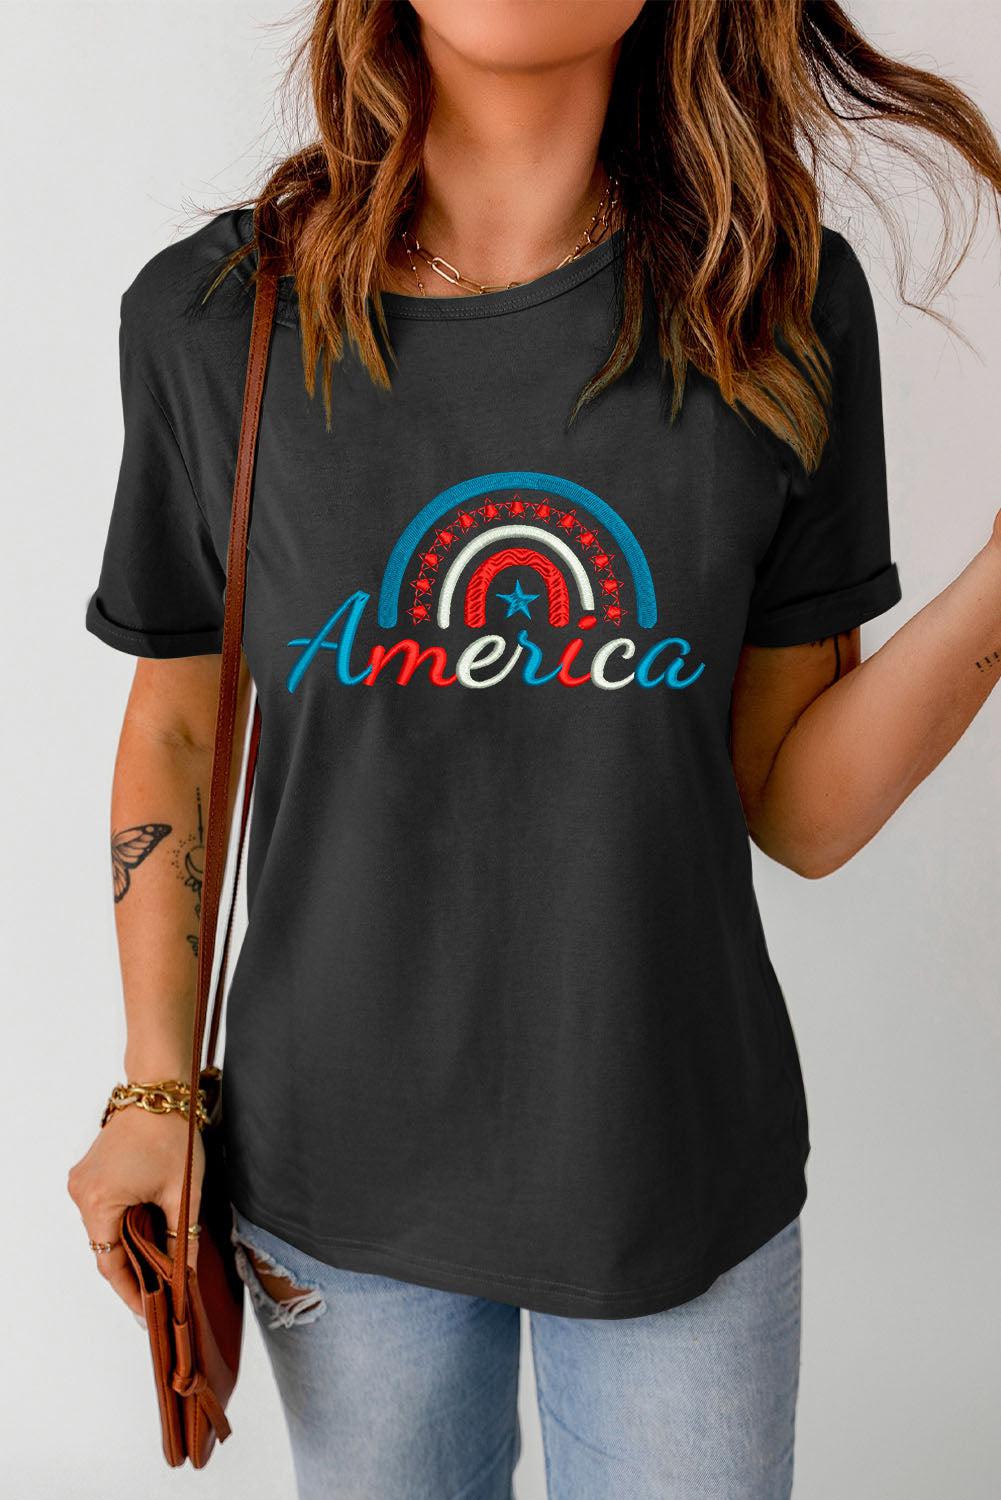 AMERICAN Embroidered Round Neck Cuffed Tee Shirt BLUE ZONE PLANET